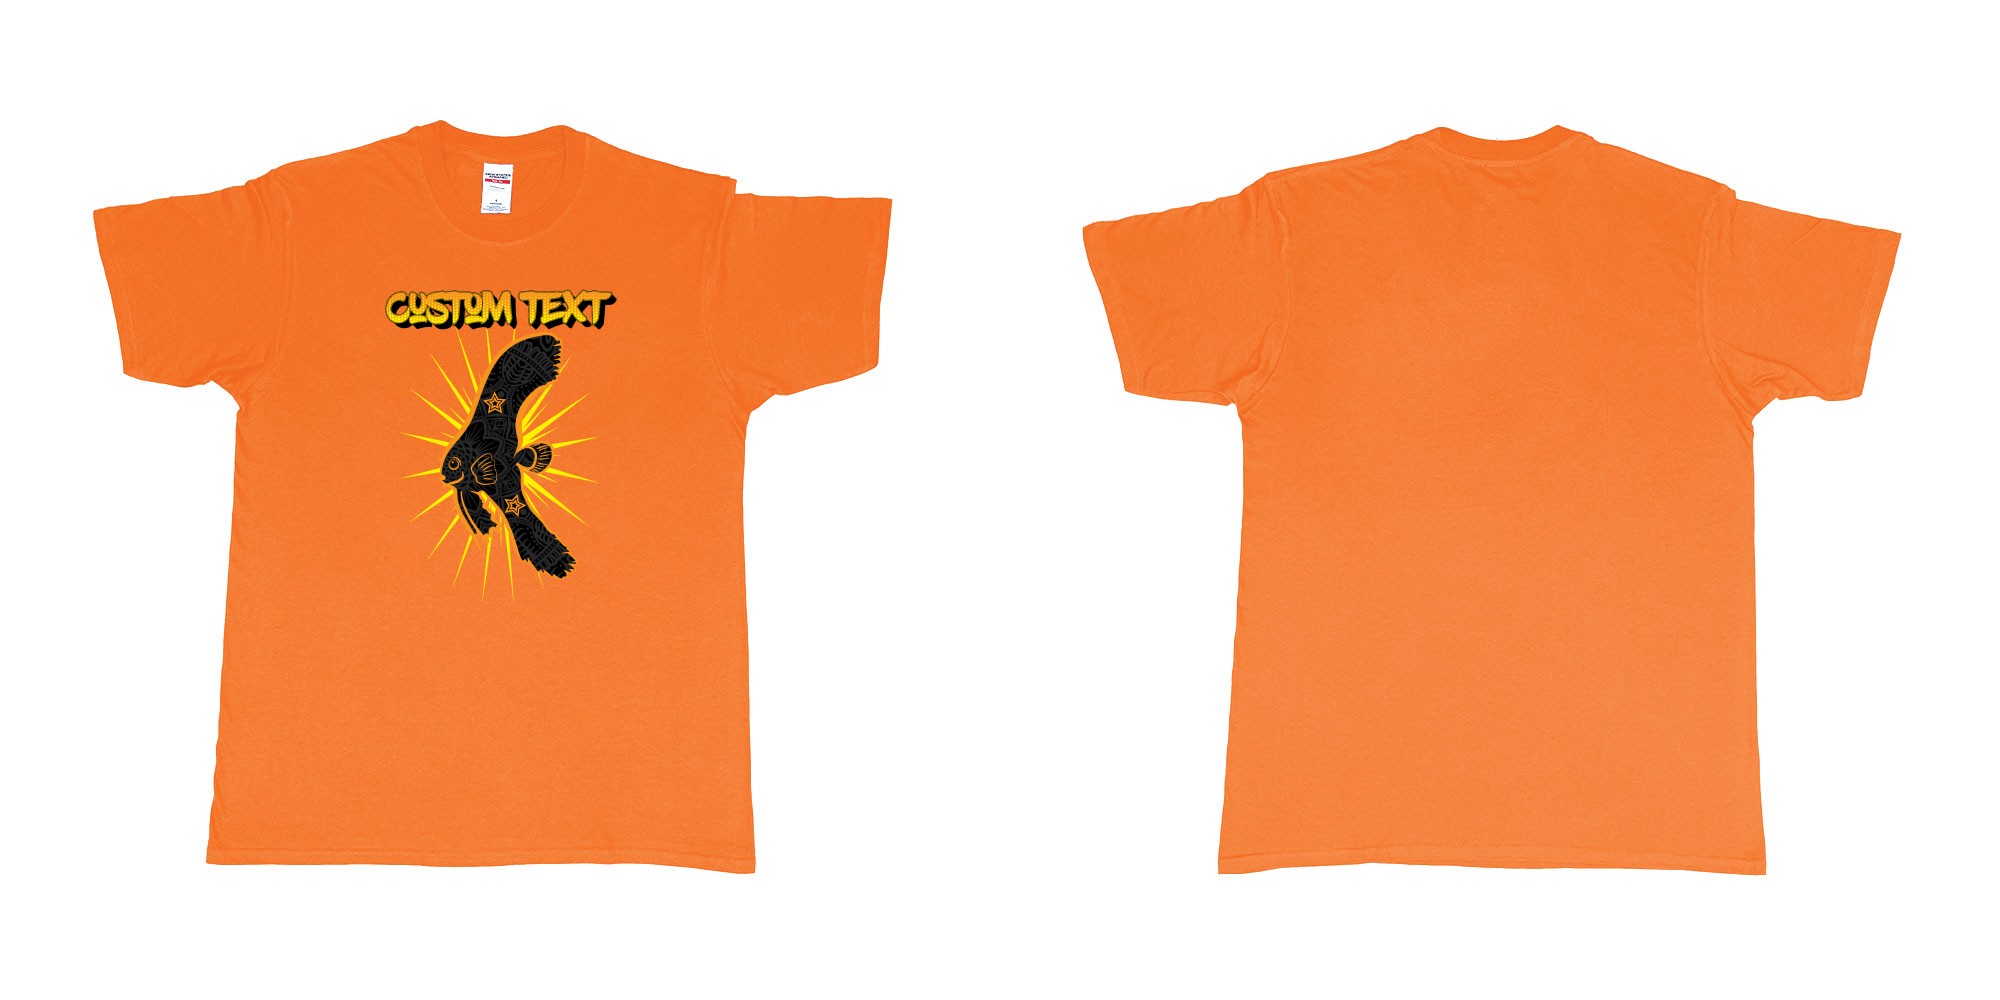 Custom tshirt design batfish juvenile star own text in fabric color orange choice your own text made in Bali by The Pirate Way